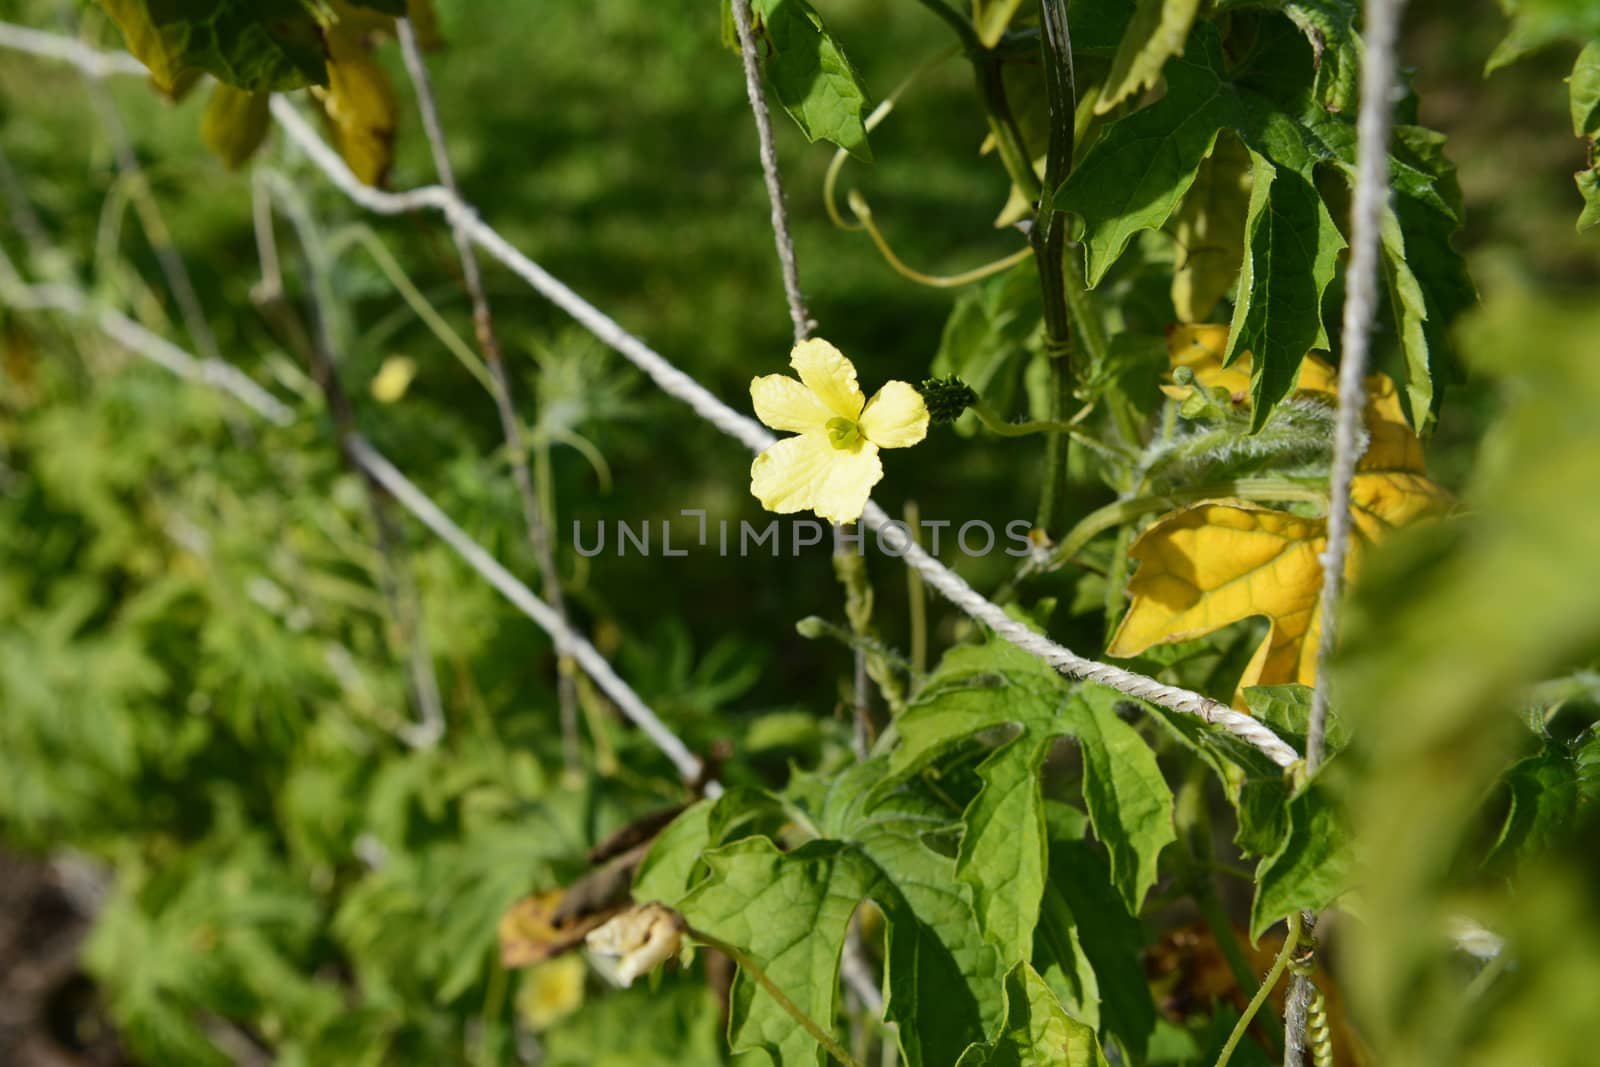 Female flower on a bitter gourd plant - a small fruit sits behind the petals, ready to develop after pollination